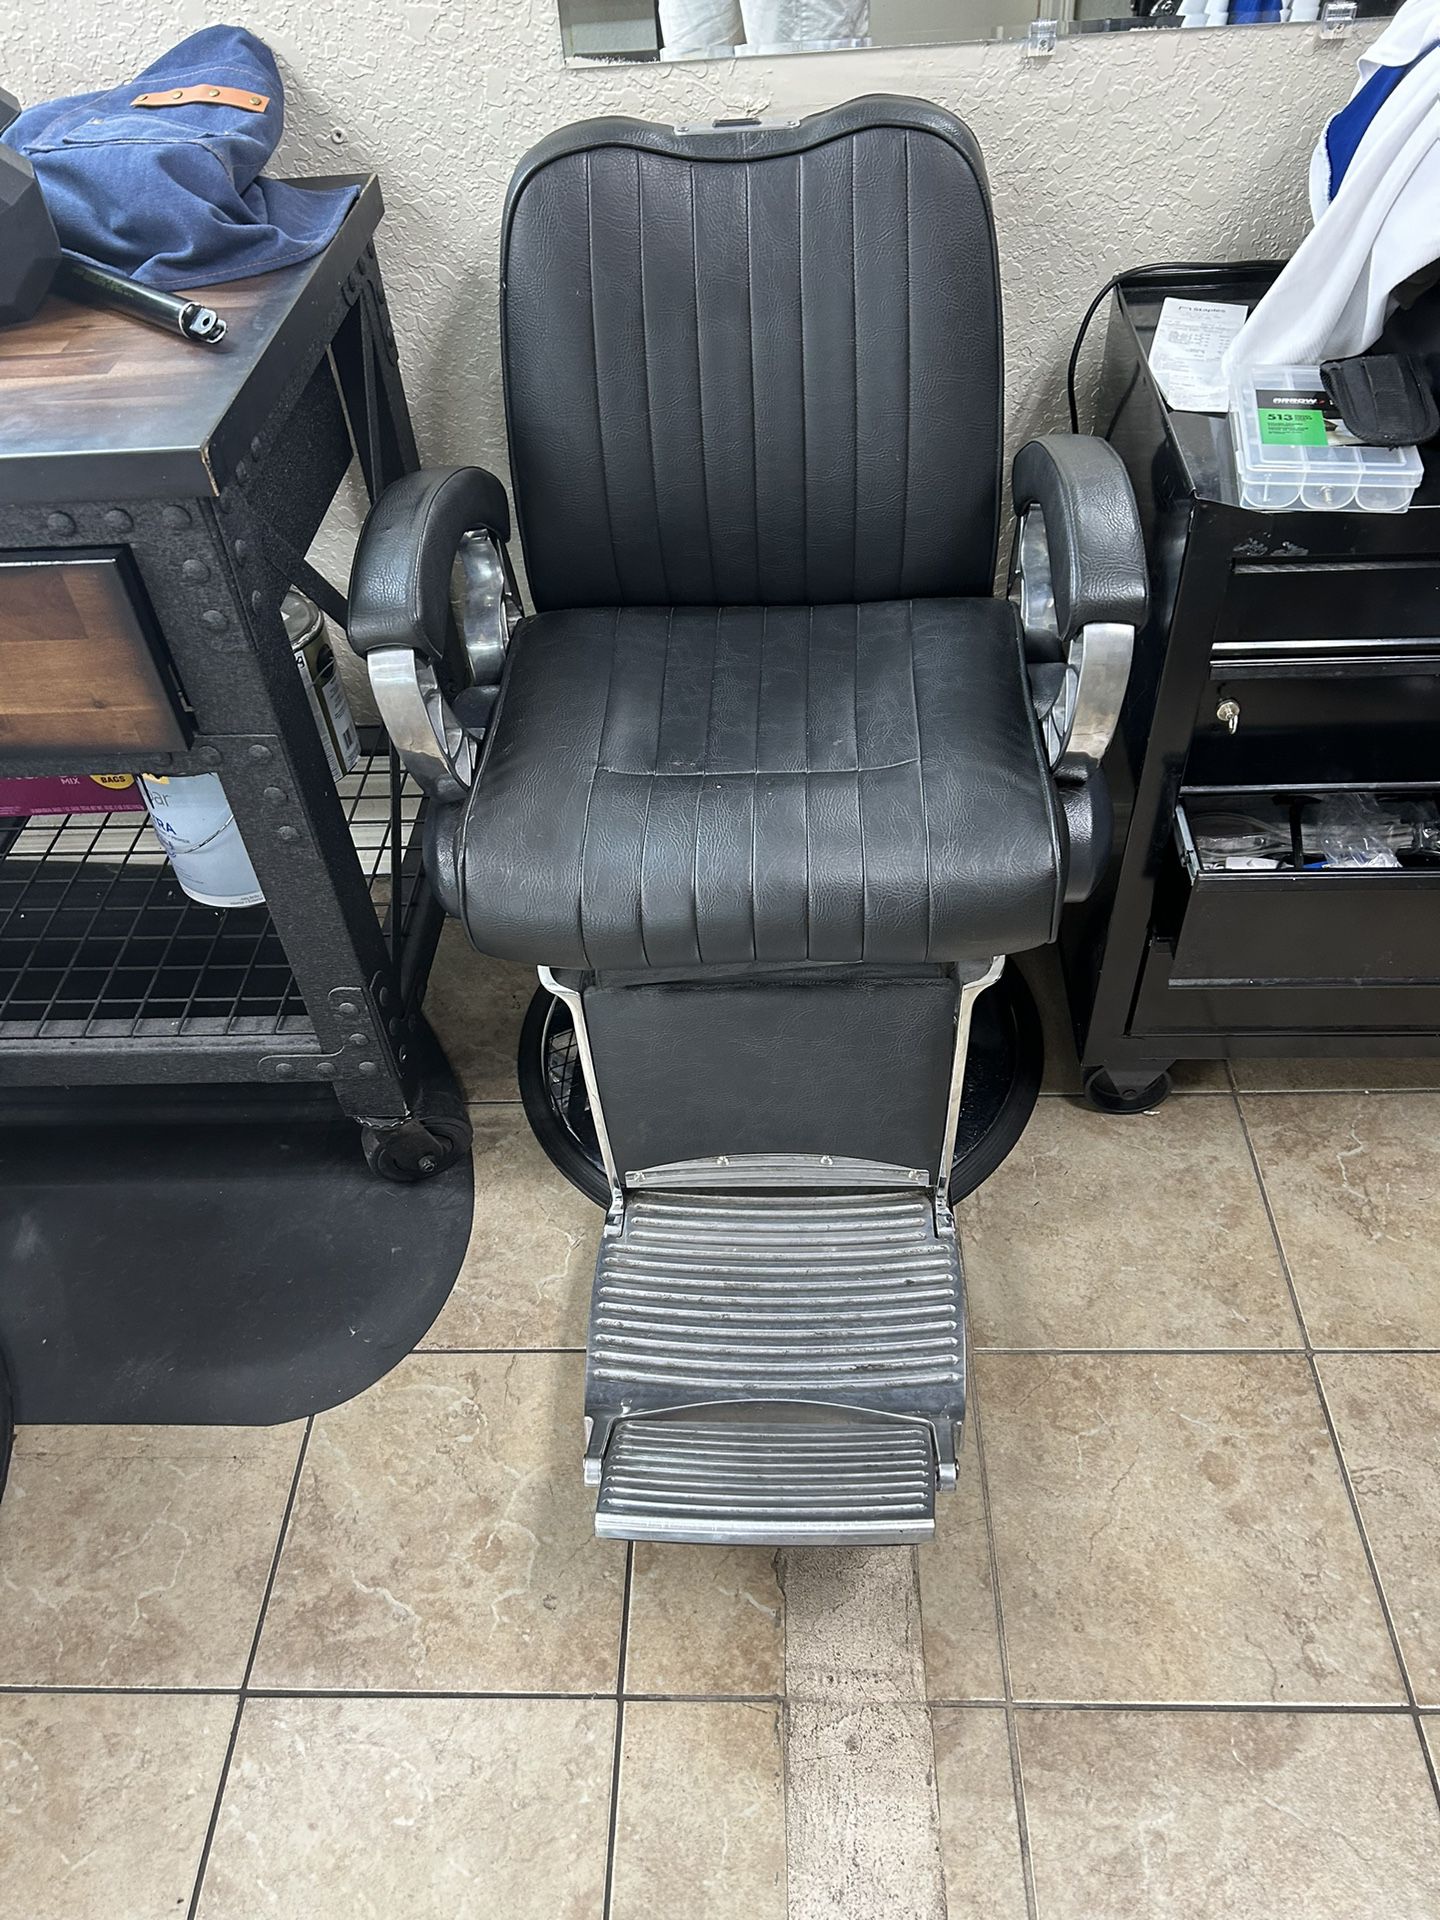 3 Barber Chairs Used But Good Condition